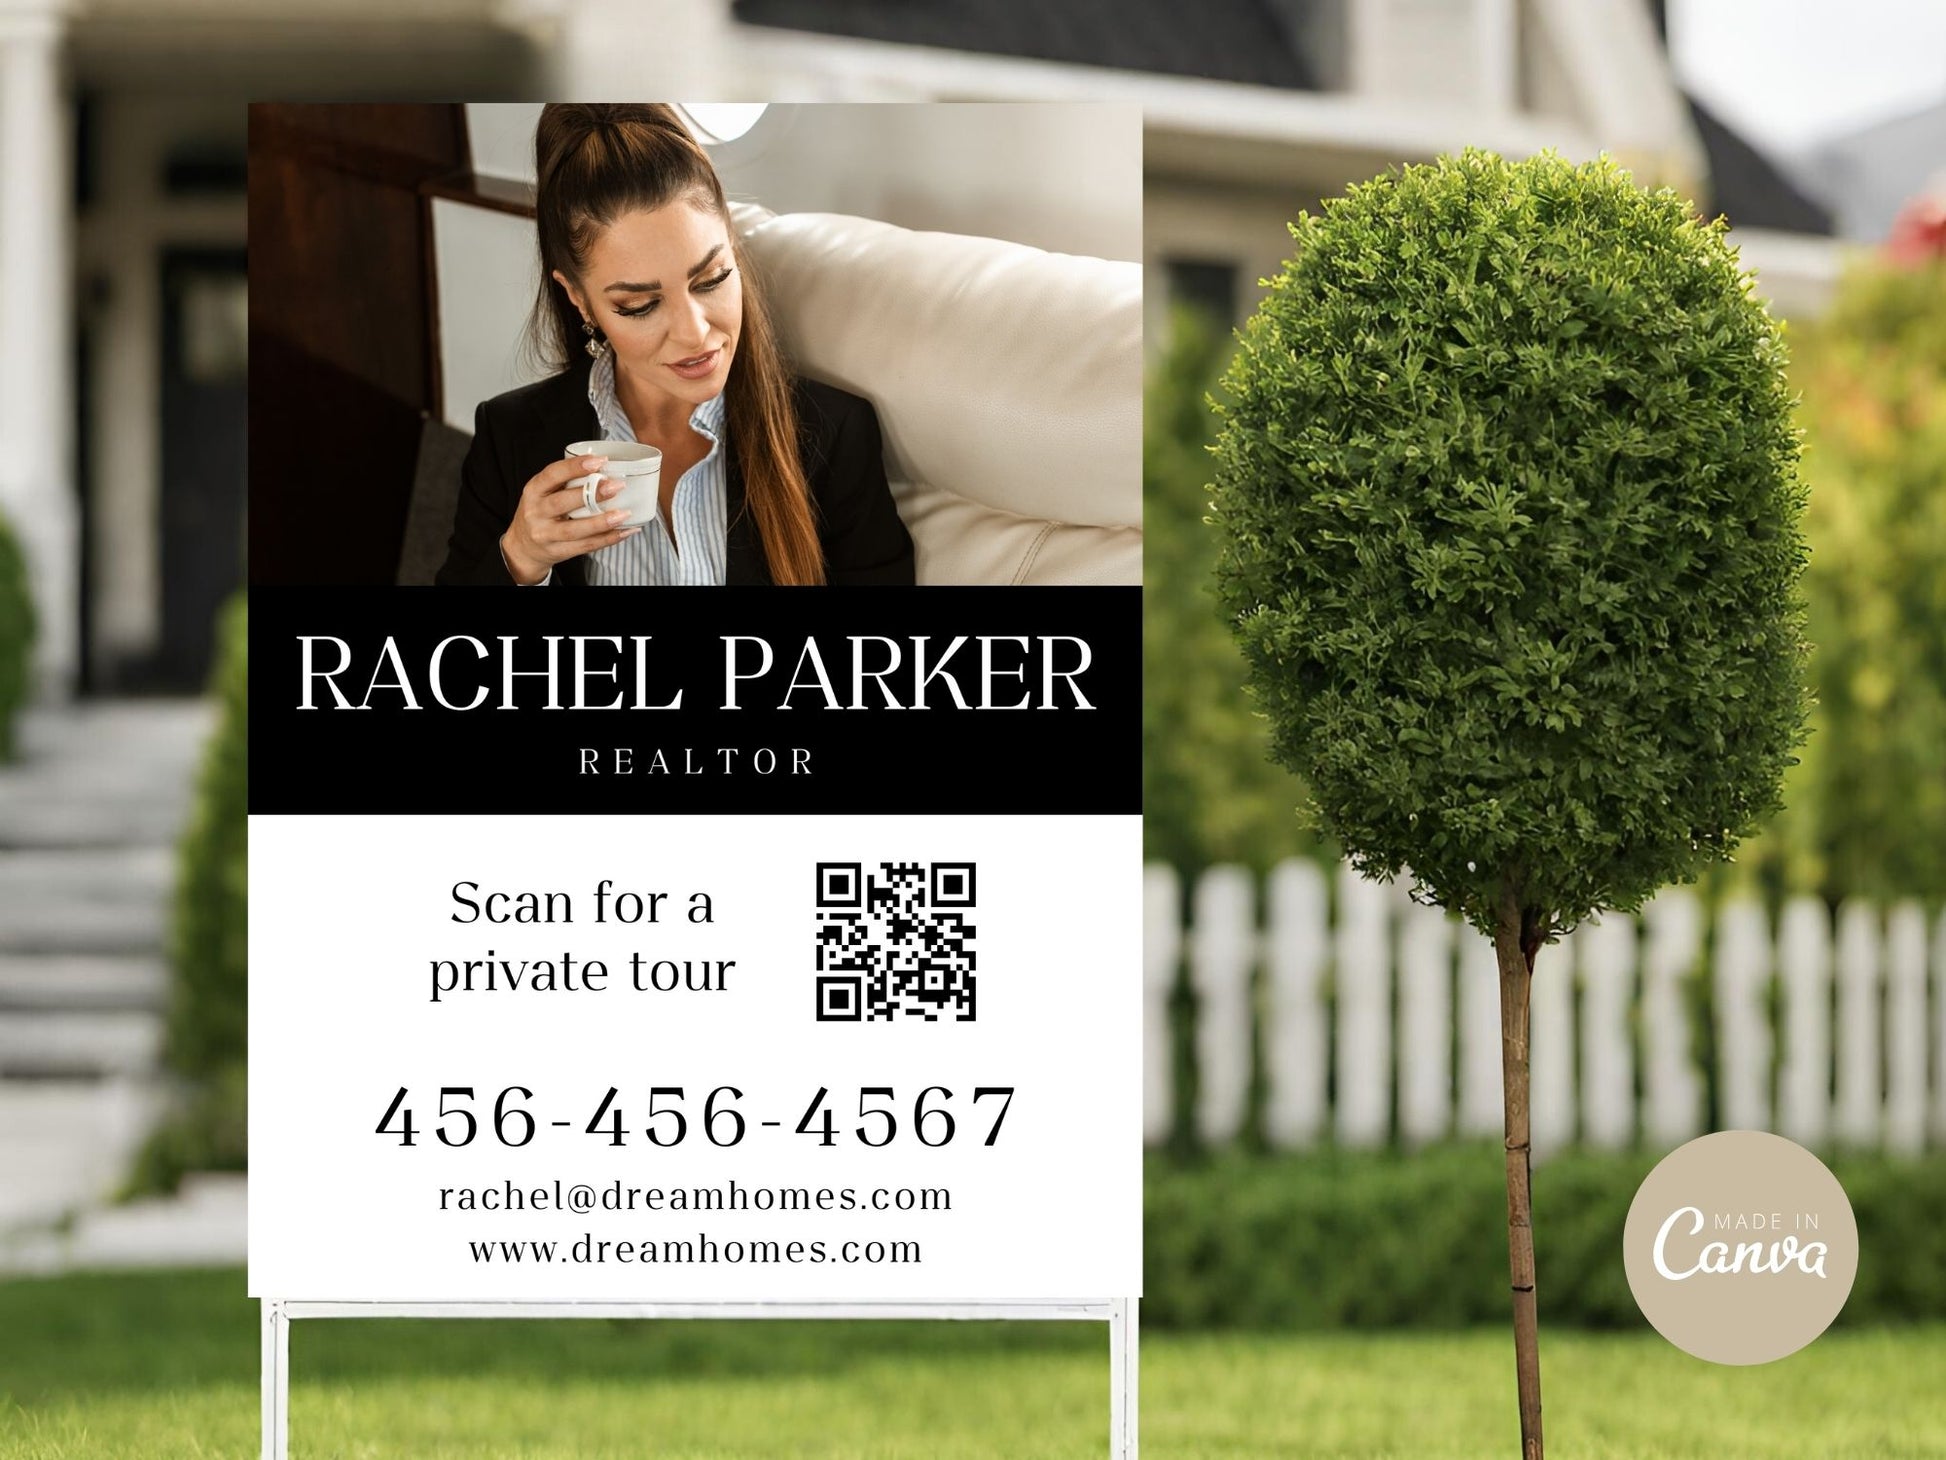 Black Luxury Yard Signs - Elegant and sophisticated yard signs for premium real estate listings.